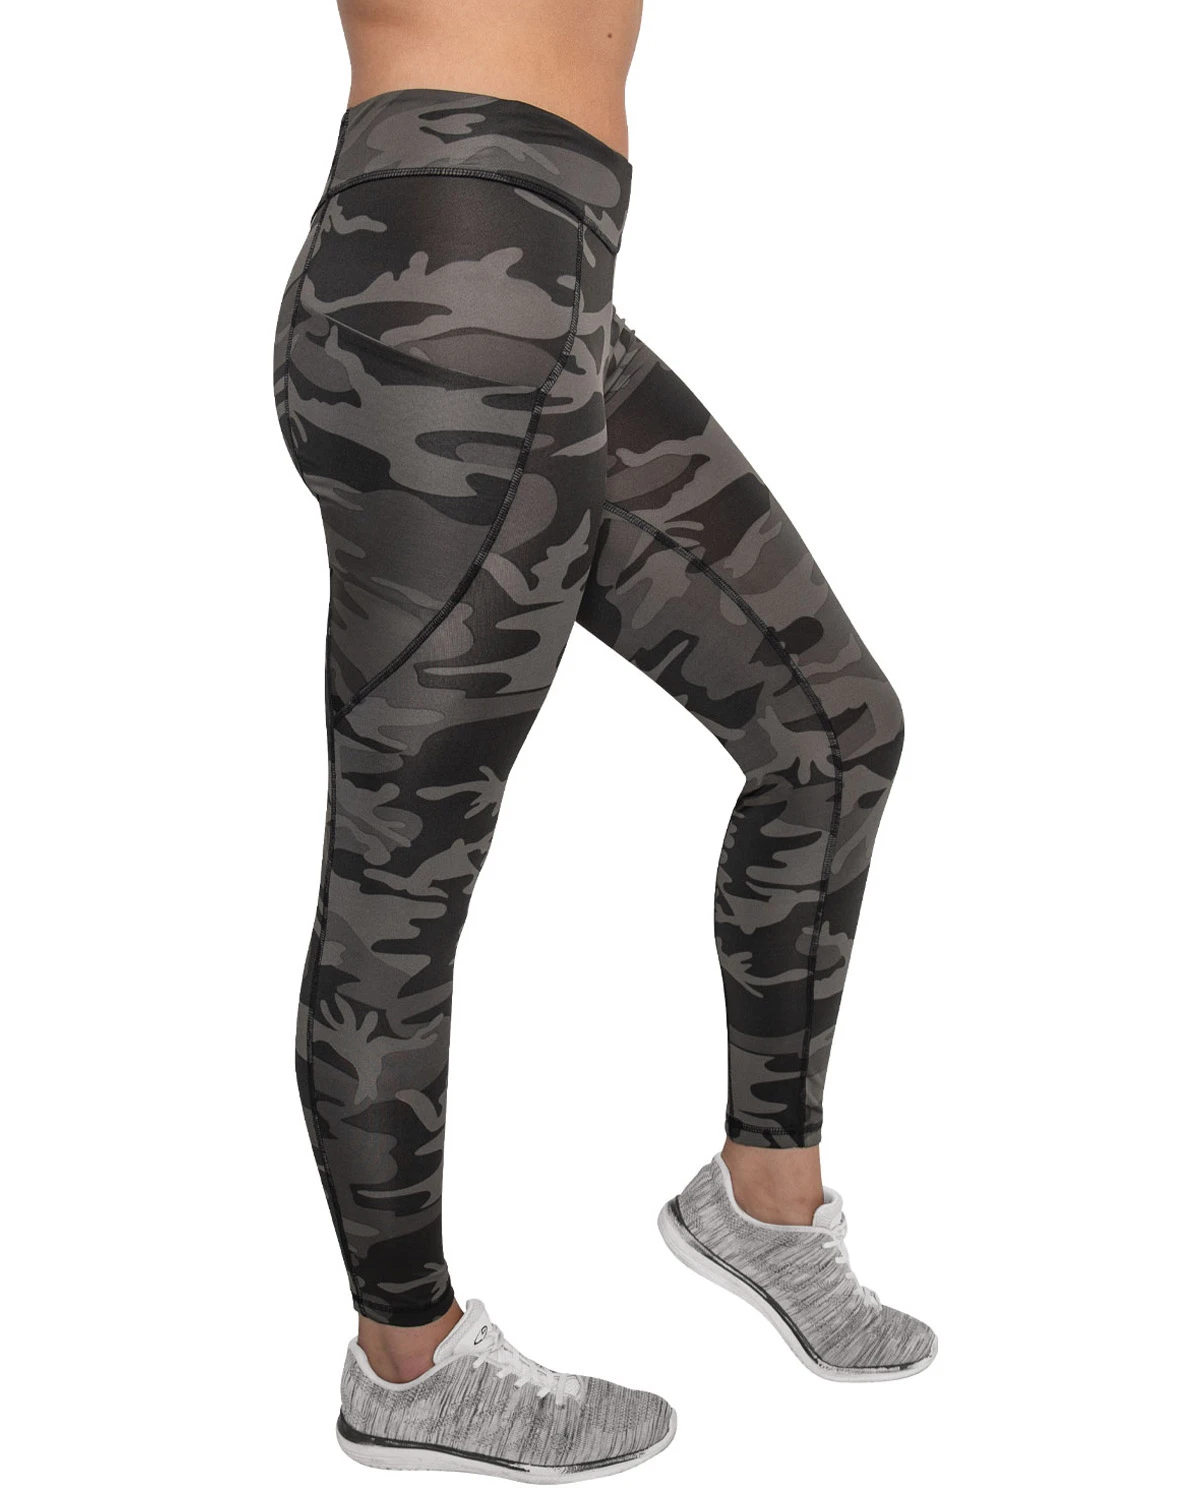 Buy Rothco Womens Workout Performance Camo Leggings With Pockets